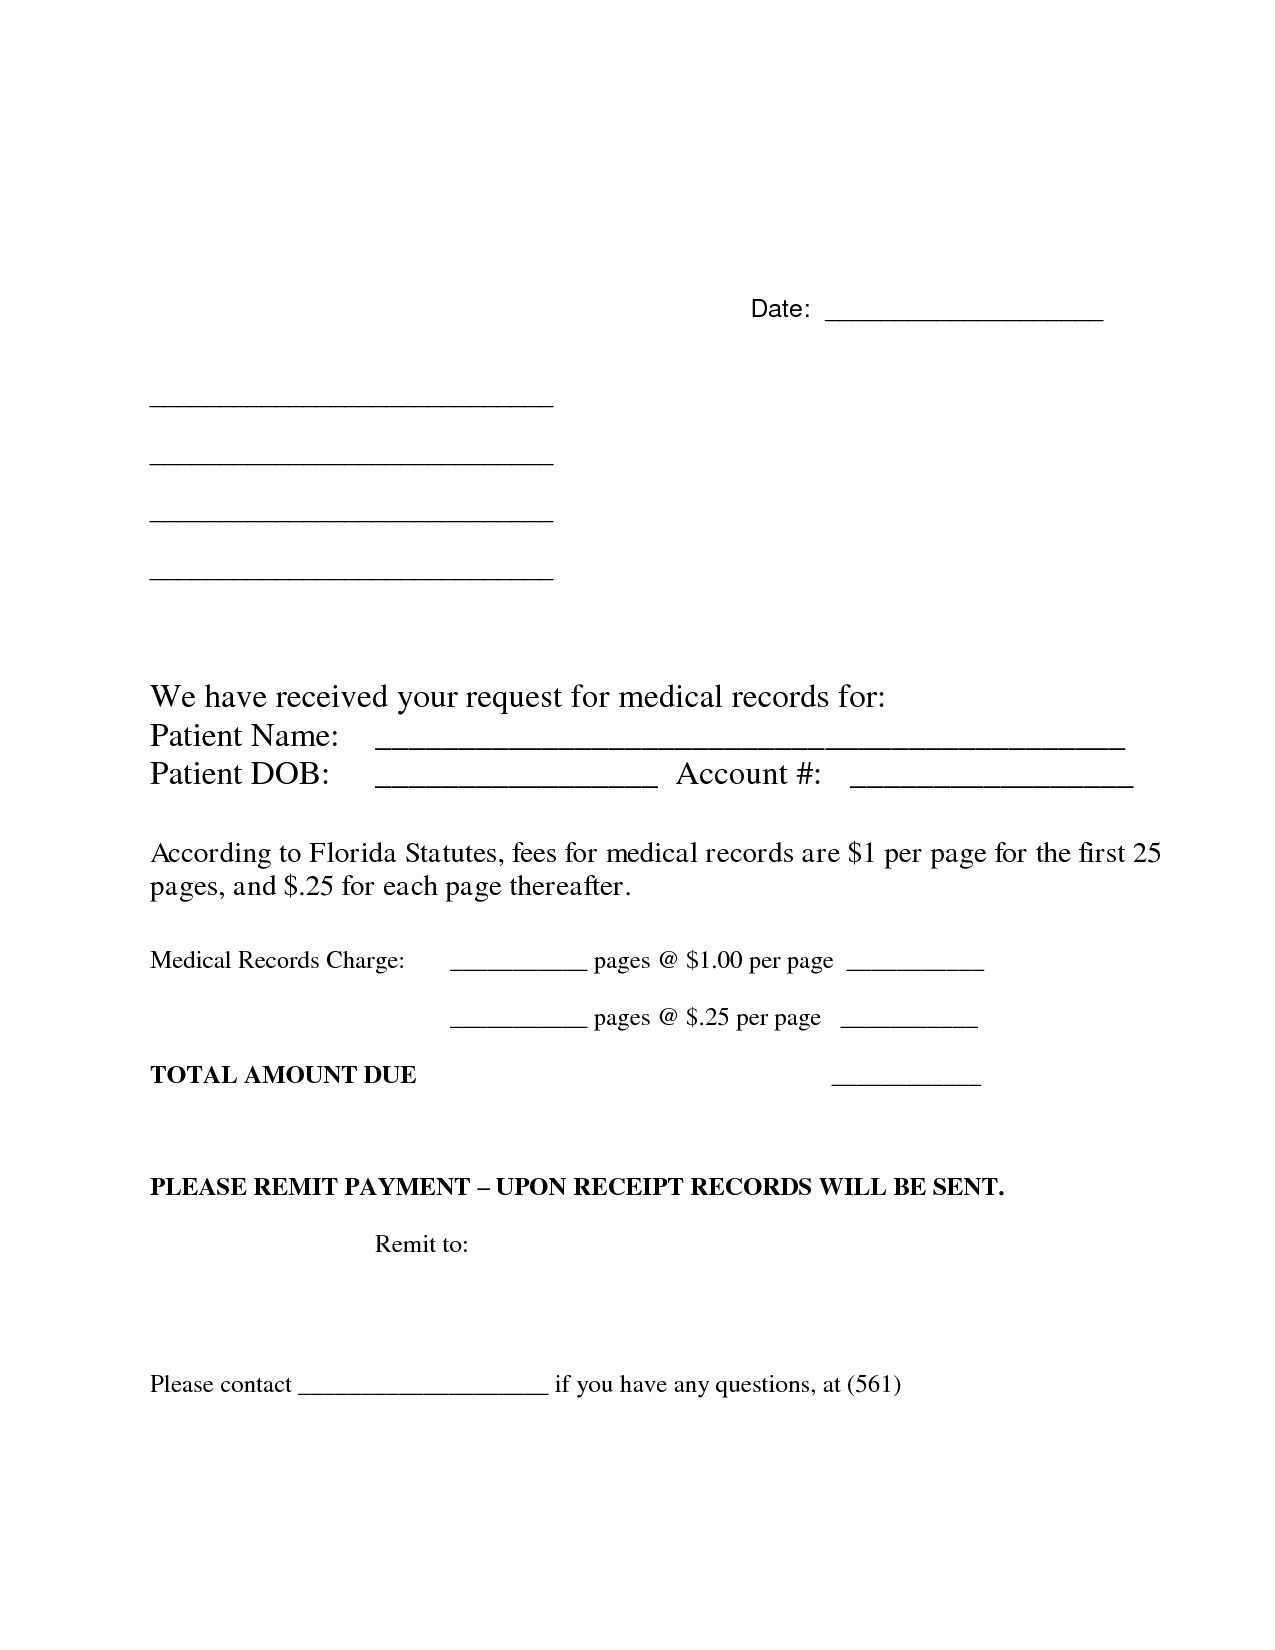 Medical Record form Template Elegant Medical Record Request Template Ten Important Facts that